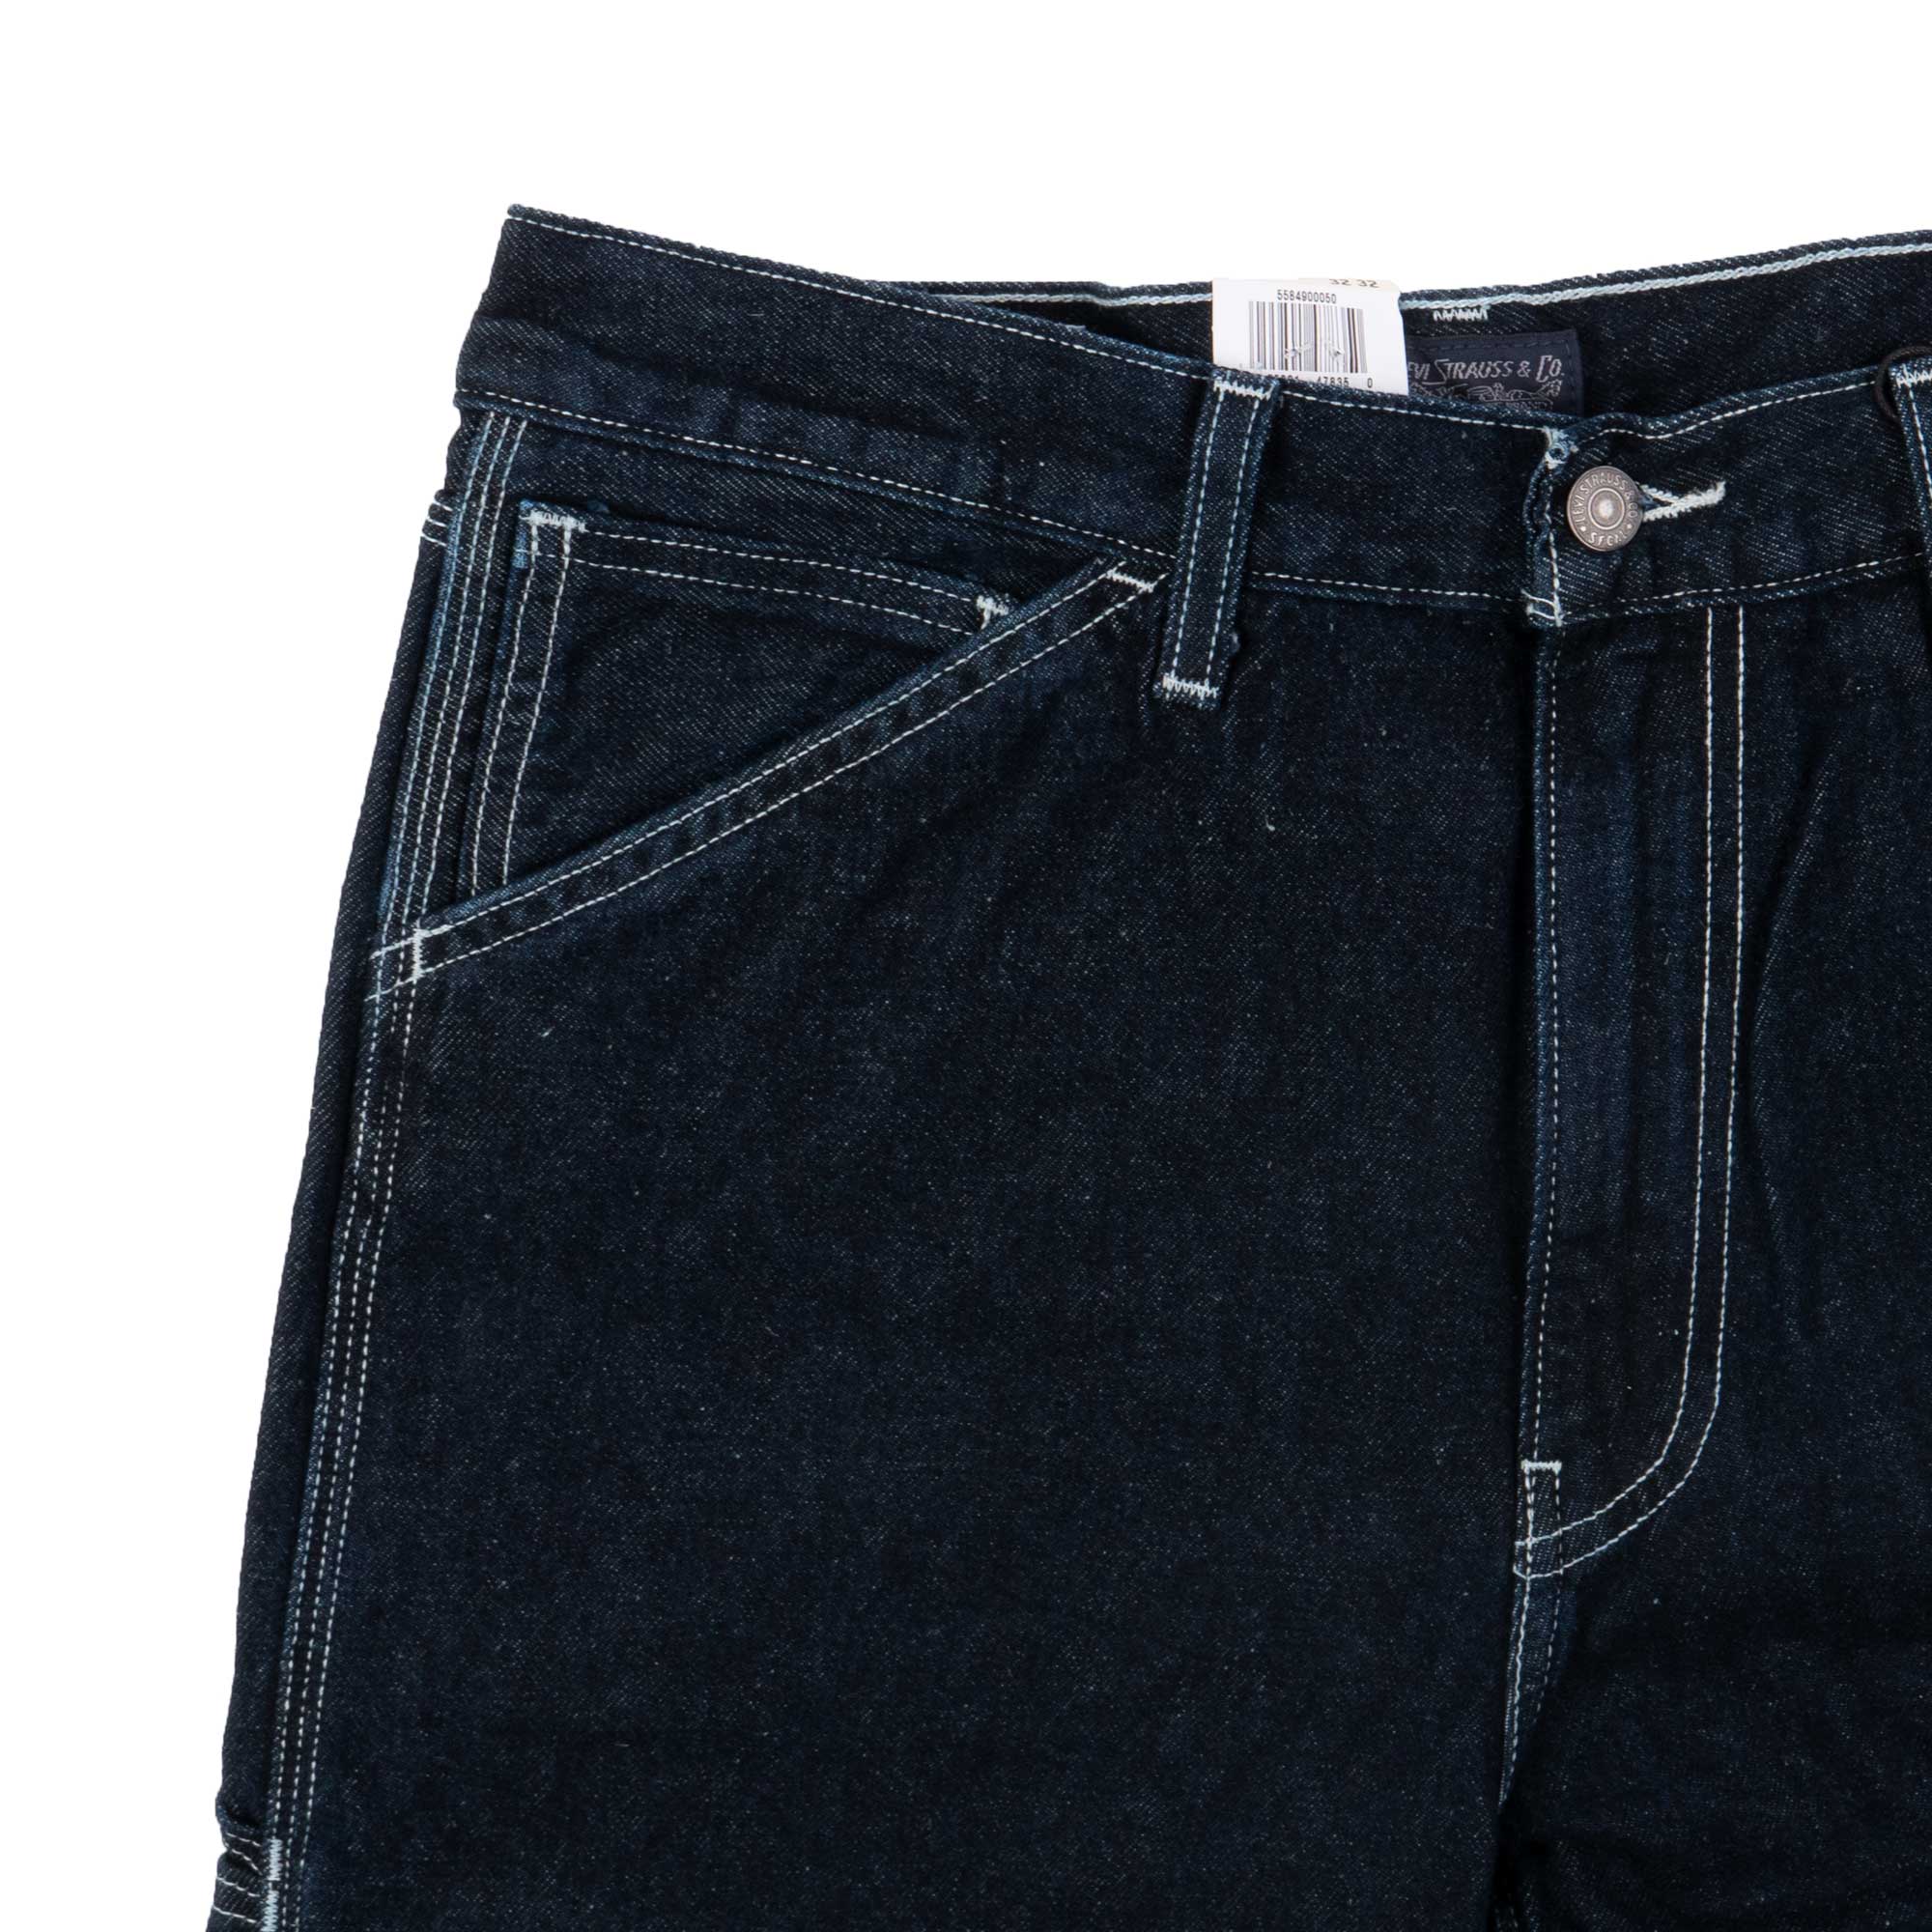 Levis Stay Loose Carpenter Jeans, Spotted Road